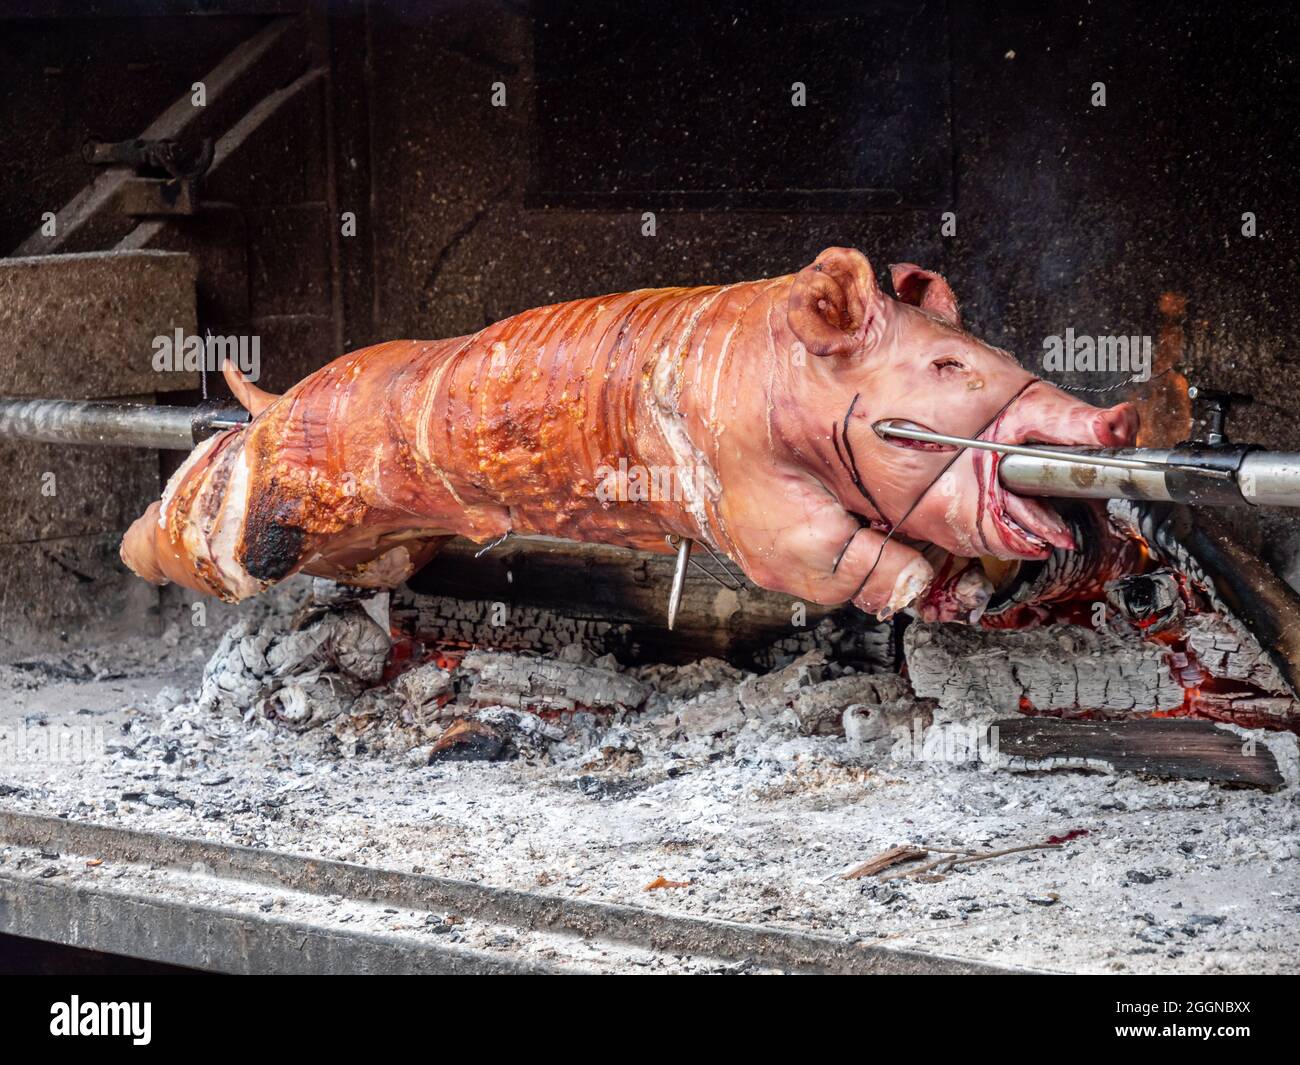 Grilled suckling pig on a spit over the fire Stock Photo - Alamy